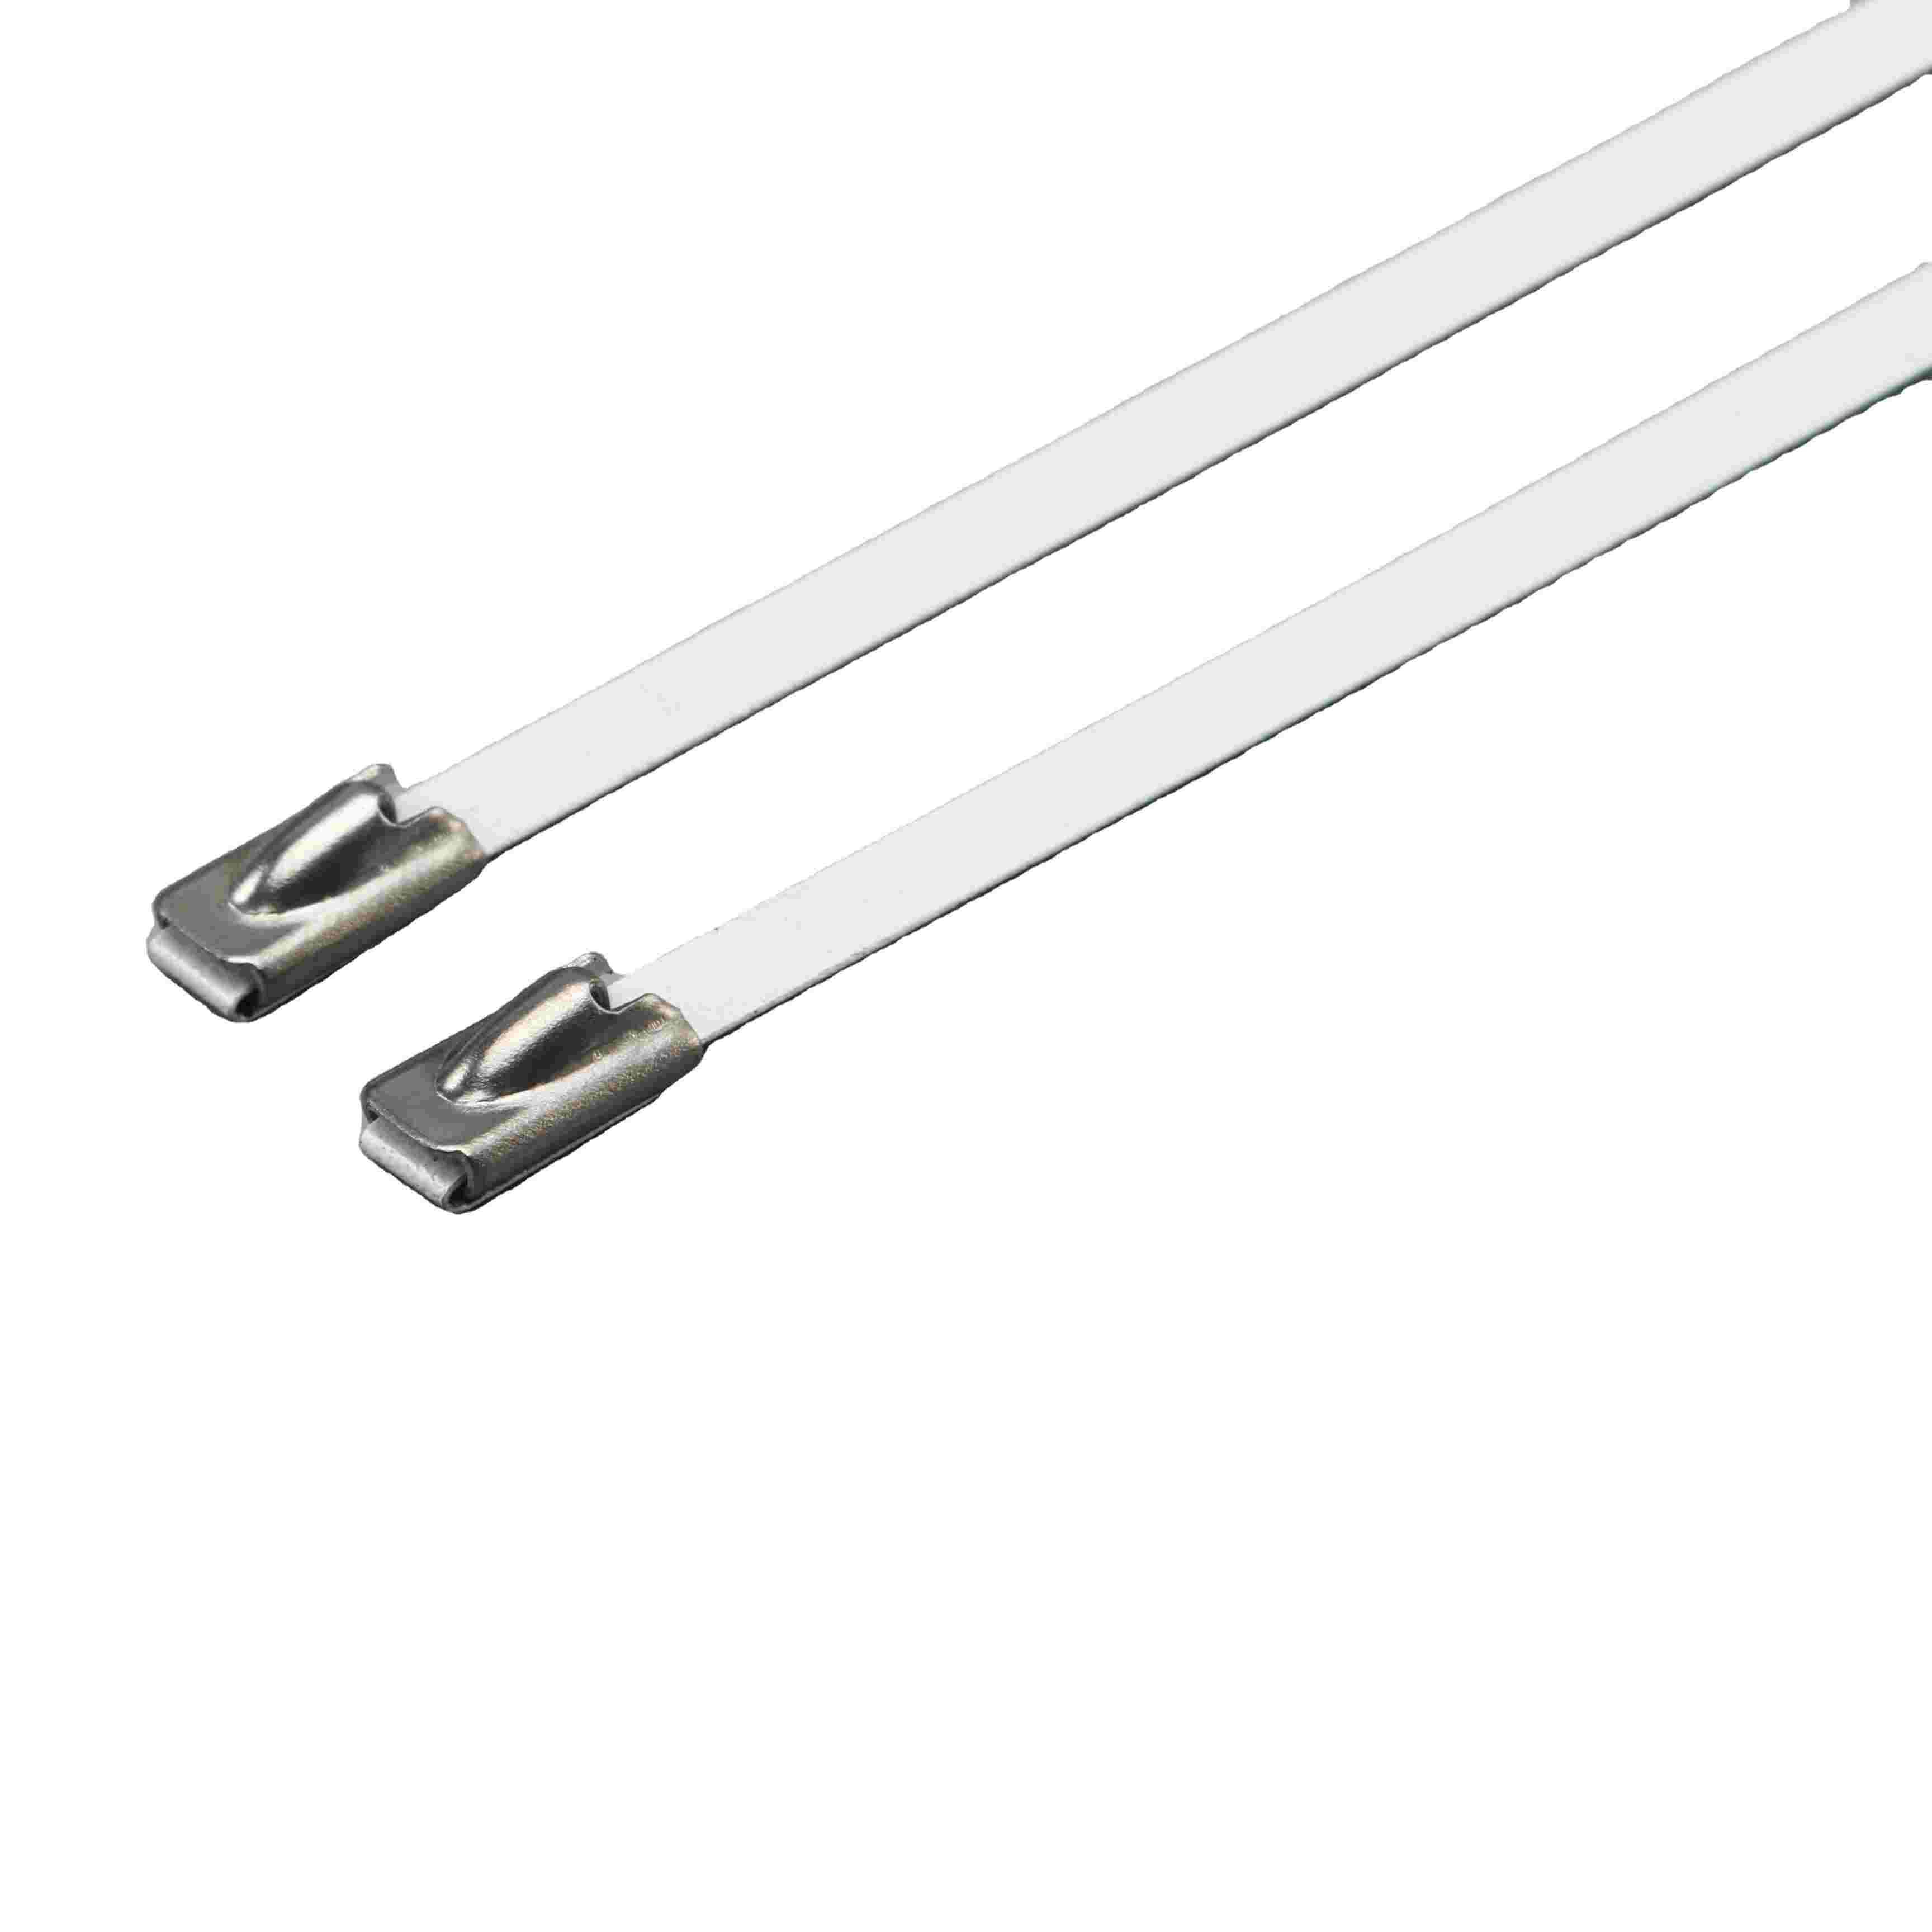 High hardness Stainless Steel Cable Ties - 2